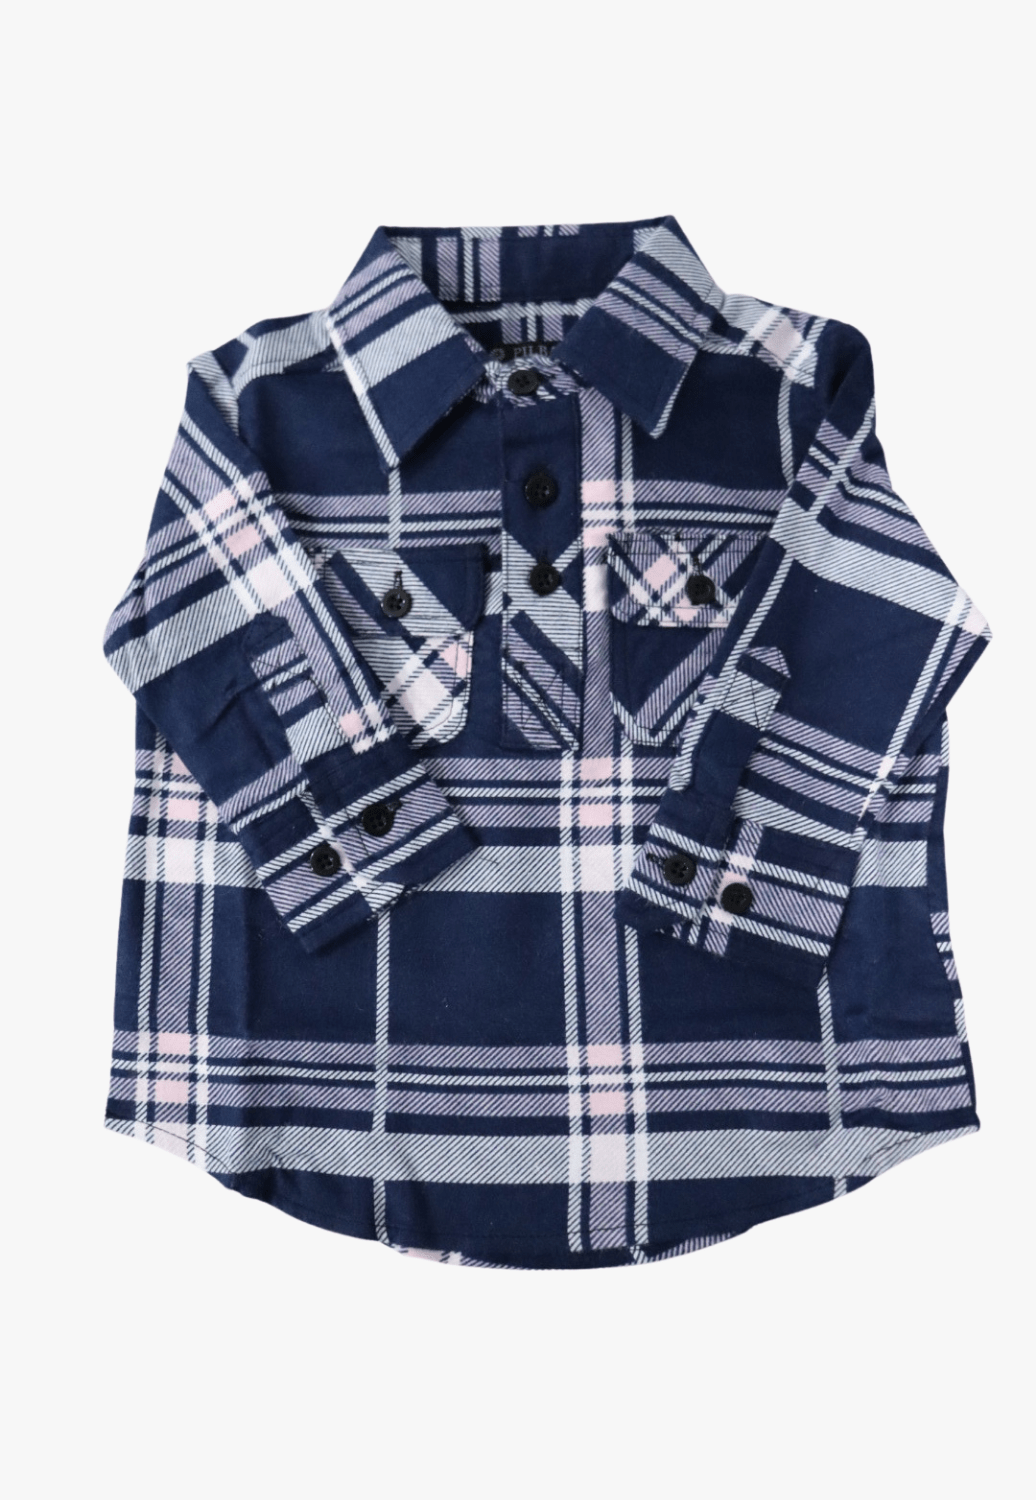 Ritemate CLOTHING-Kids Unisex Shirts Ritemate Kids Closed Front Flannelette Shirt